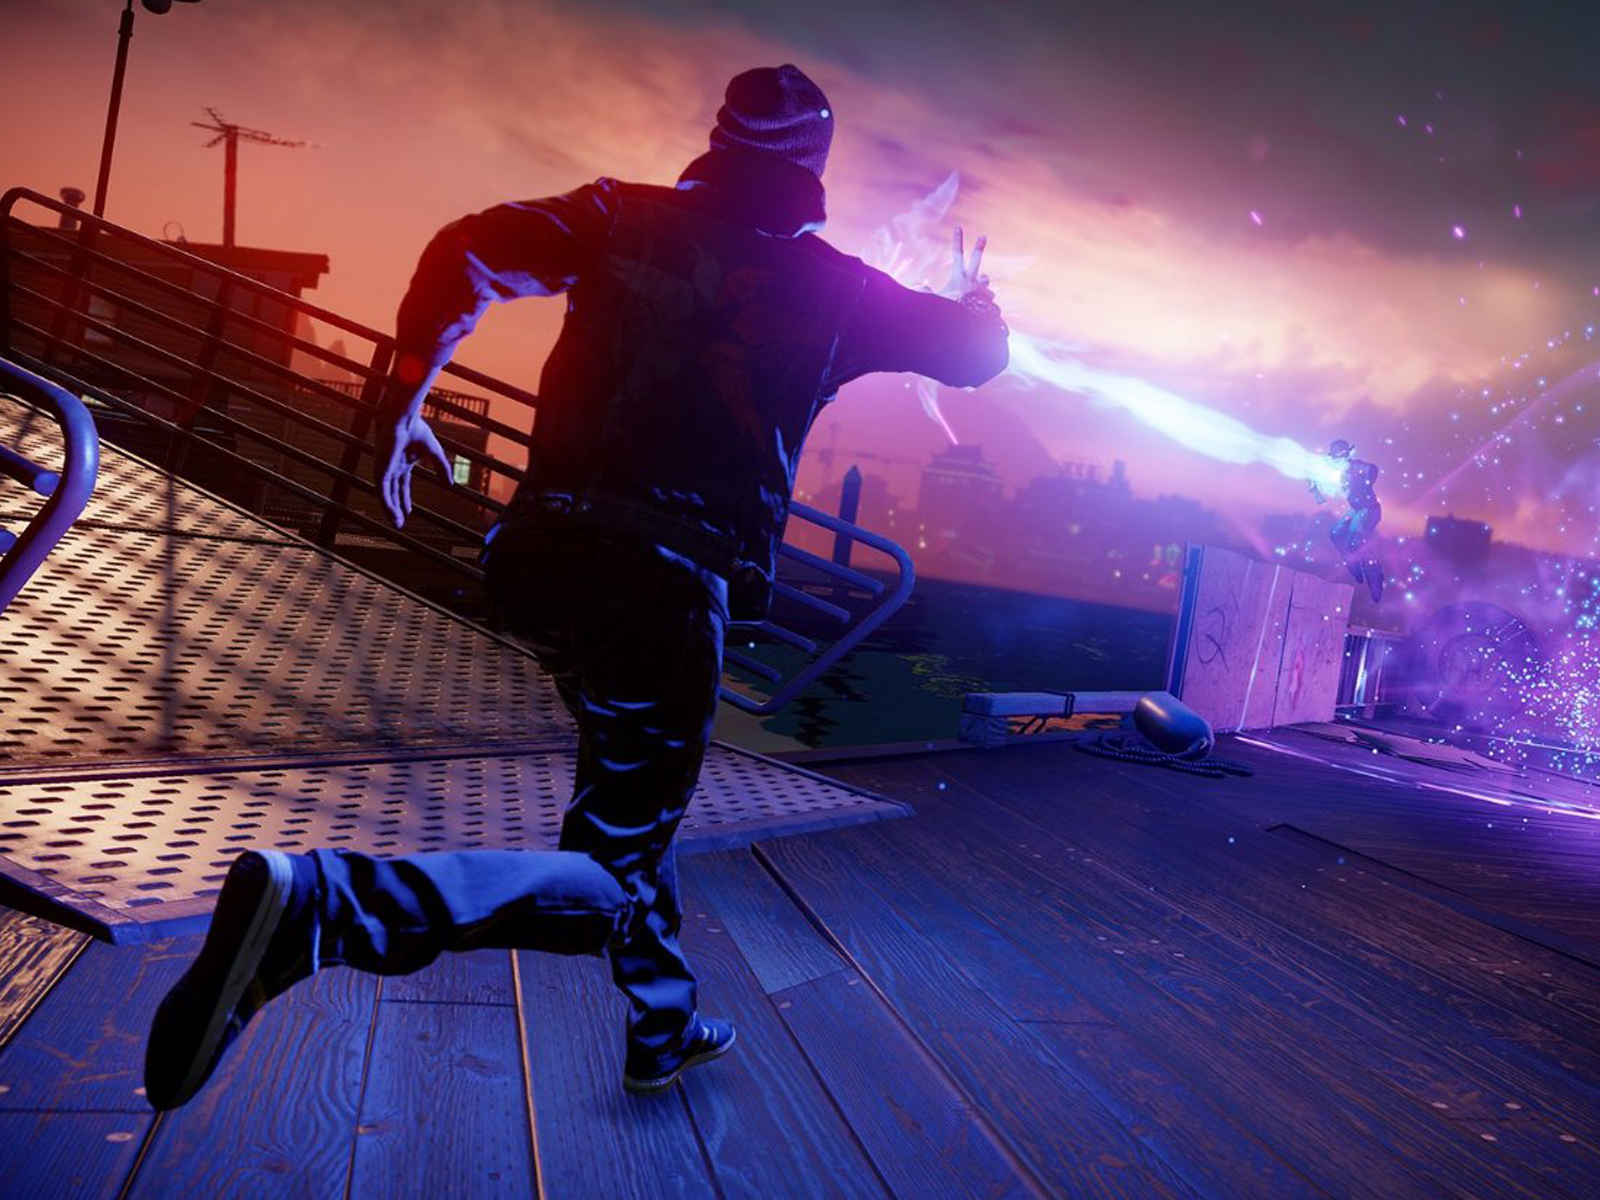 Screenshot of Infamous Second Son protagonist Delsin Rowe on a dock at night, running toward two assailants